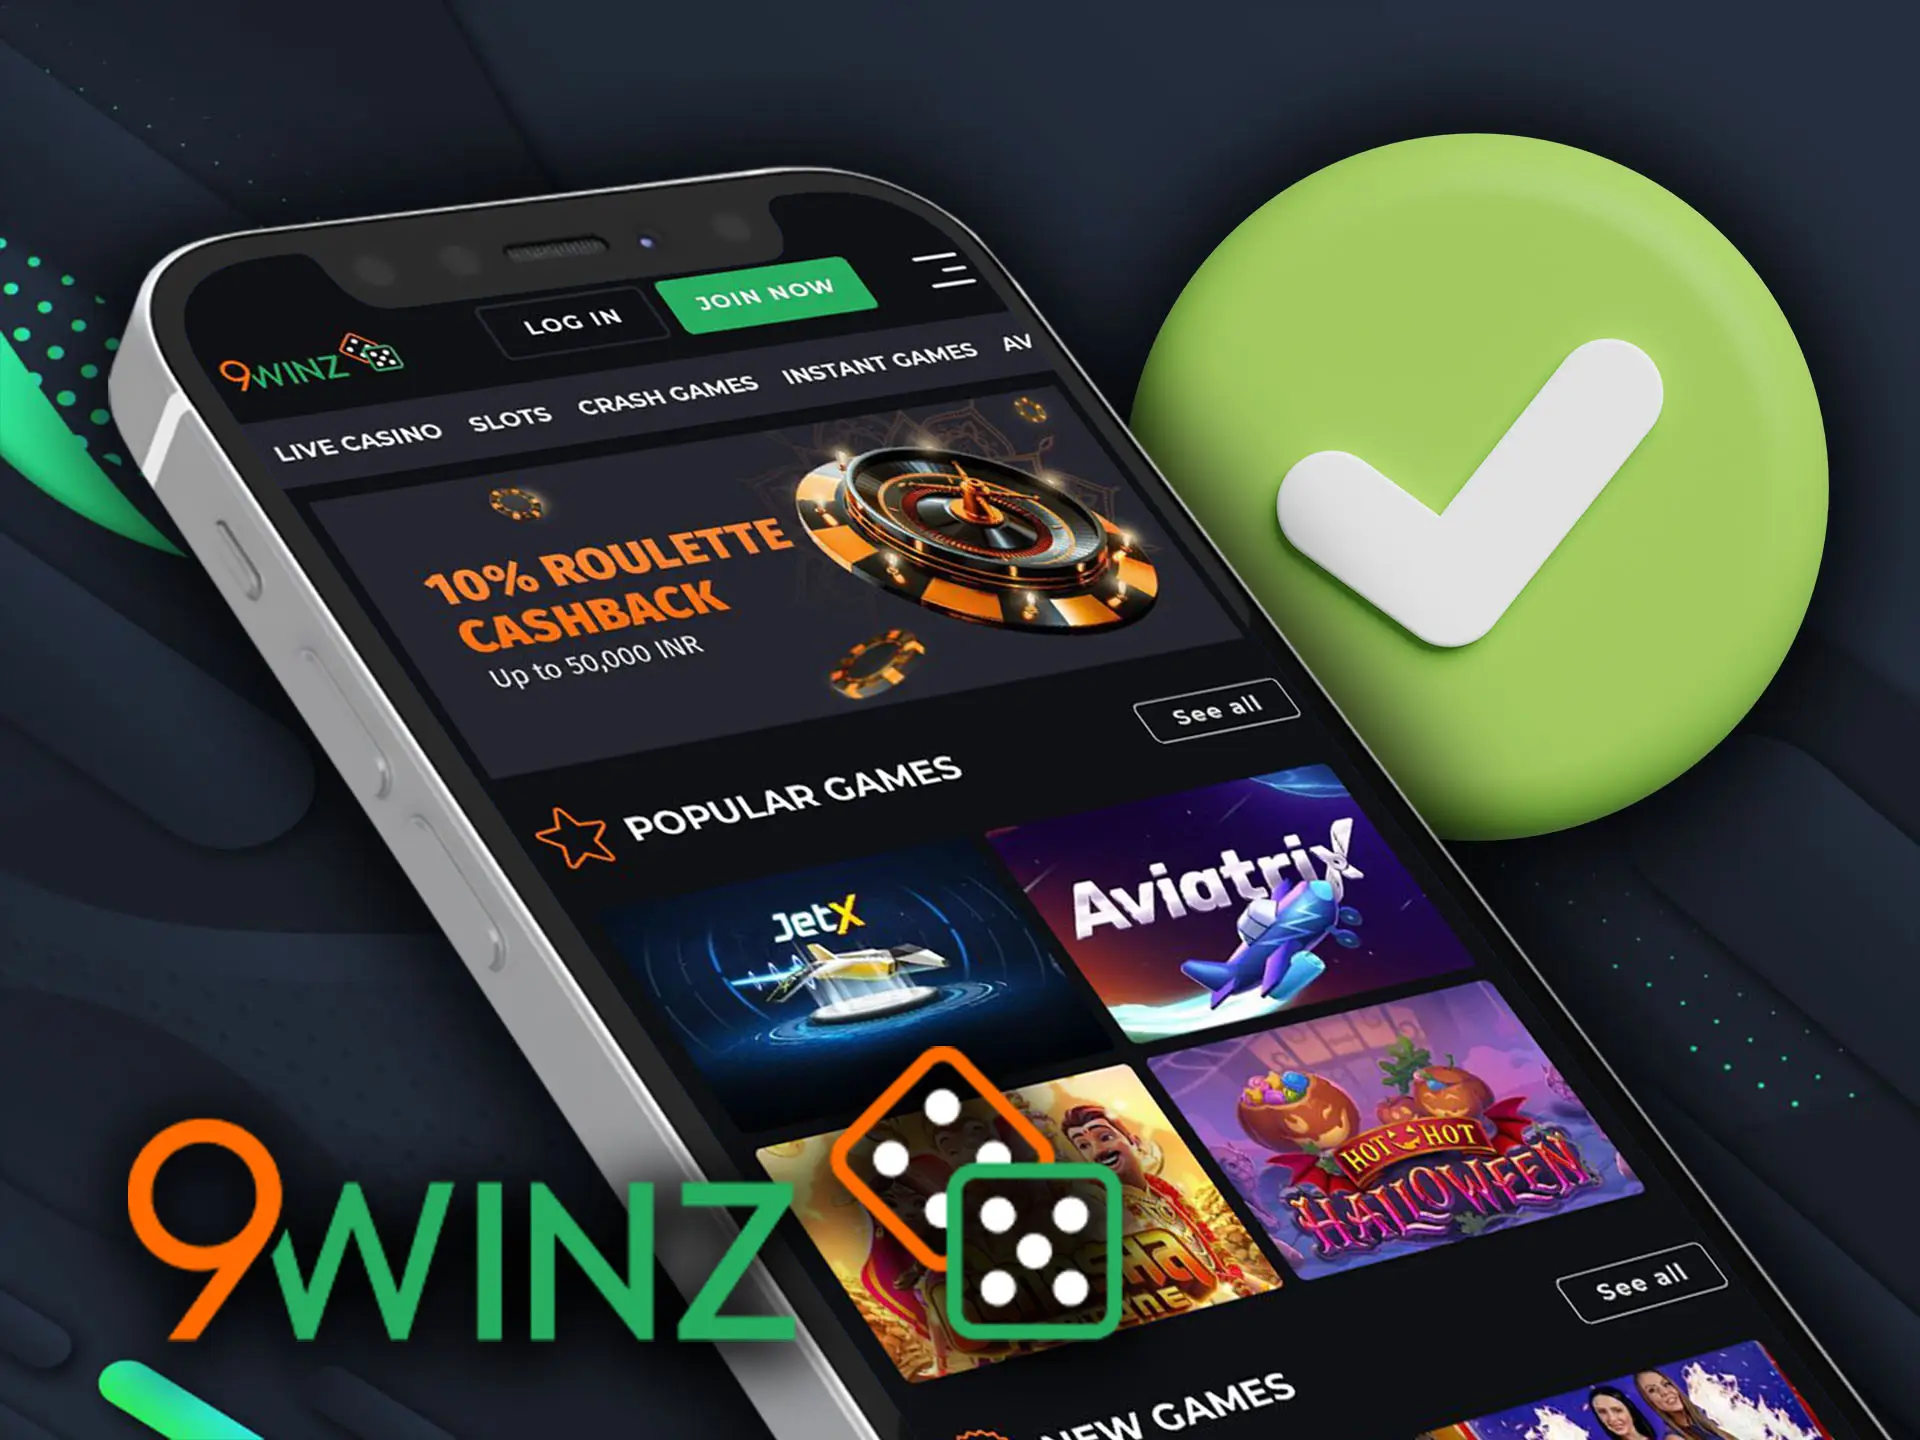 Install 9winz app on your device without any problems.